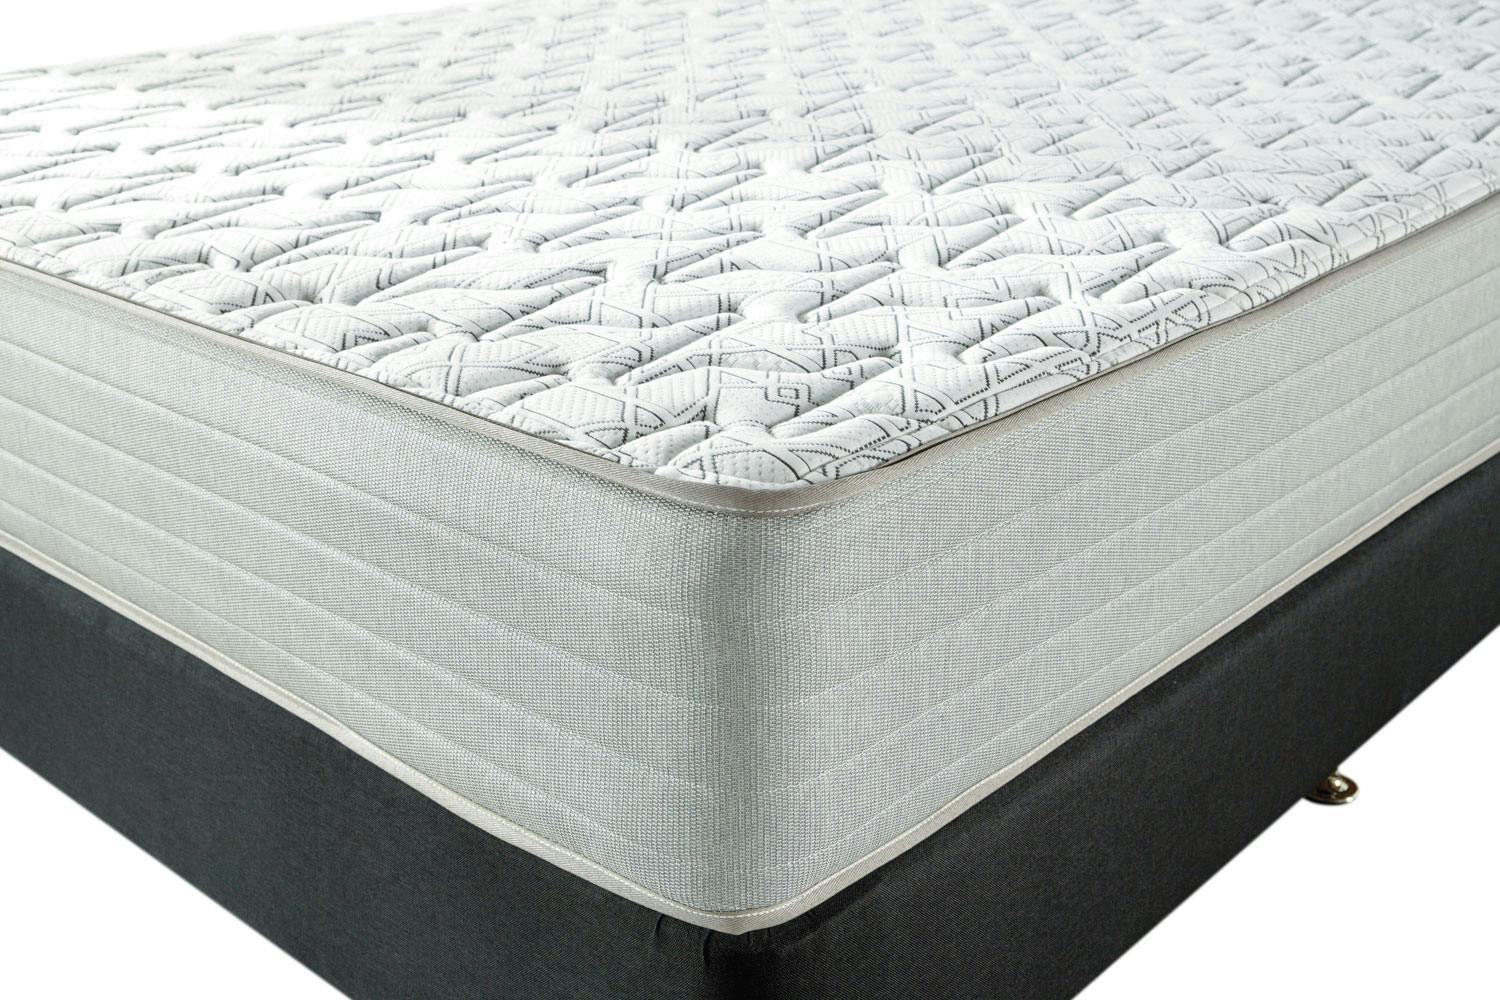 King Koil Conforma Classic II Firm Queen Mattress with Conforma Base by A.H Beard